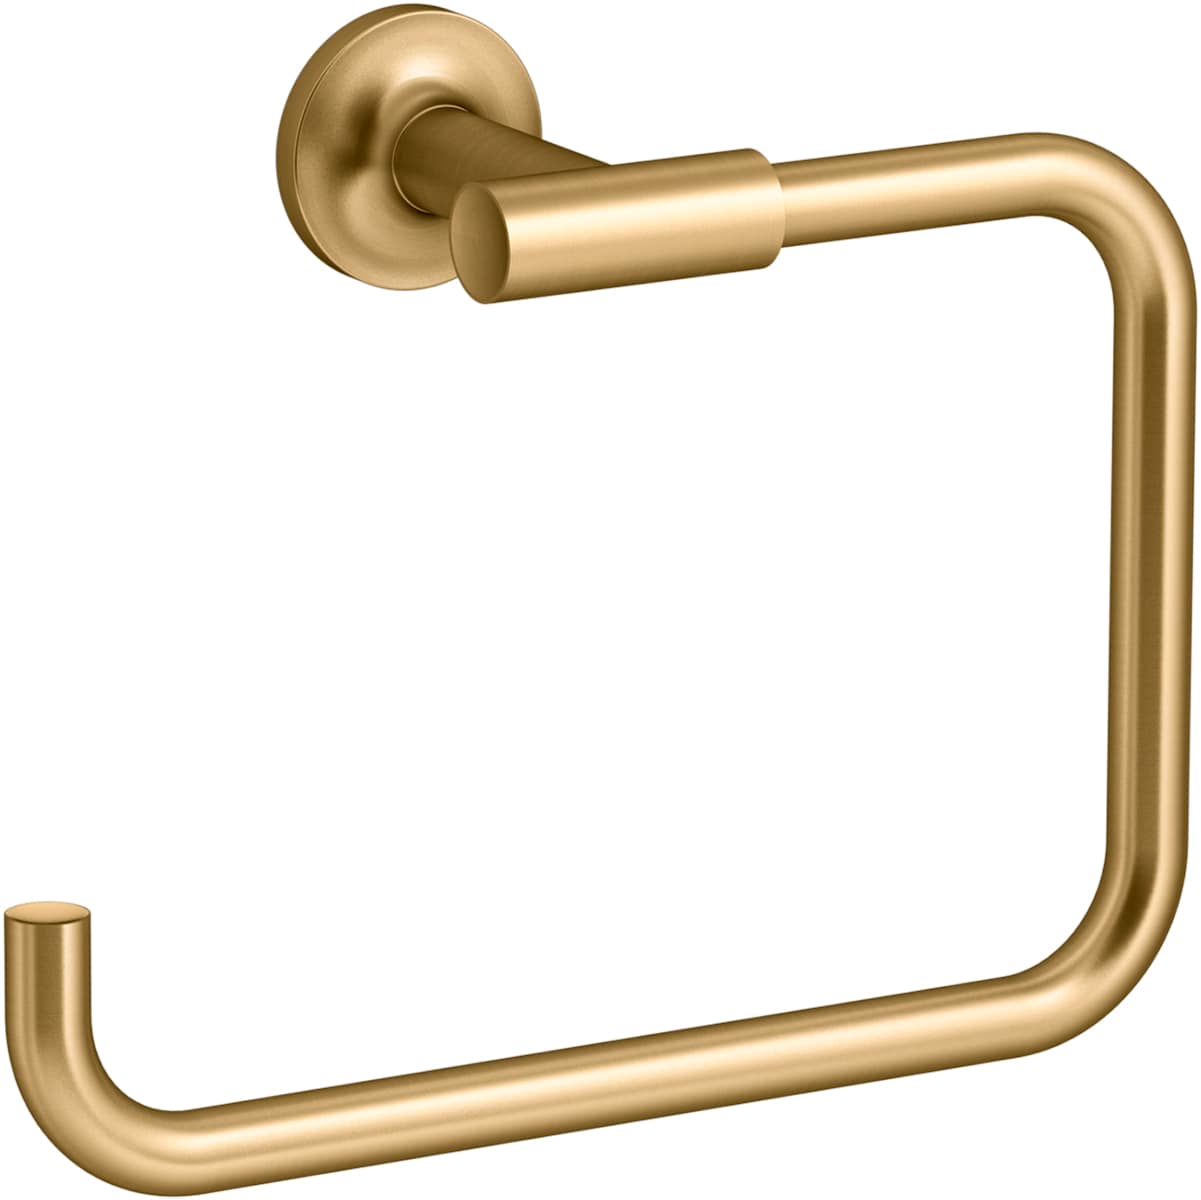 Ring Vibrant Purist at the Brass Brushed Towel Wall Rings Towel department Mount Single KOHLER Moderne in